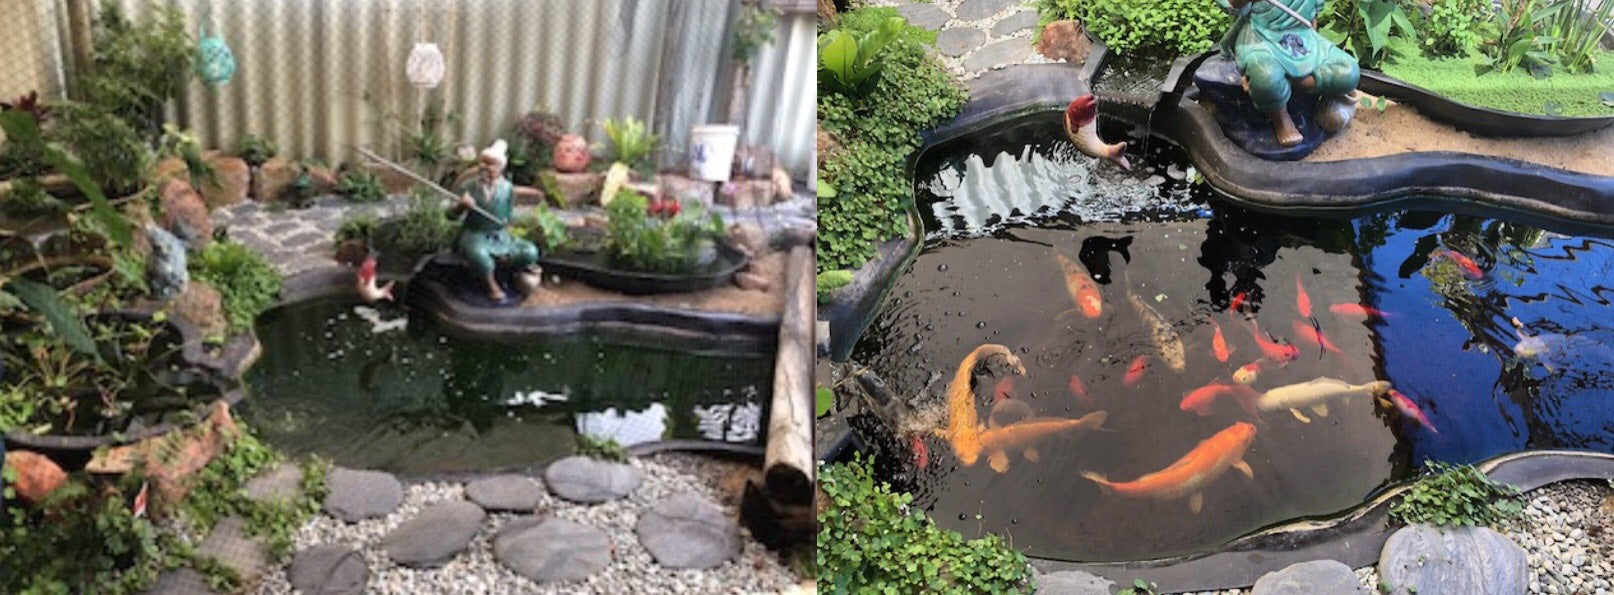 Large Fishpond/Water Feature Pack - Splosht South Africa